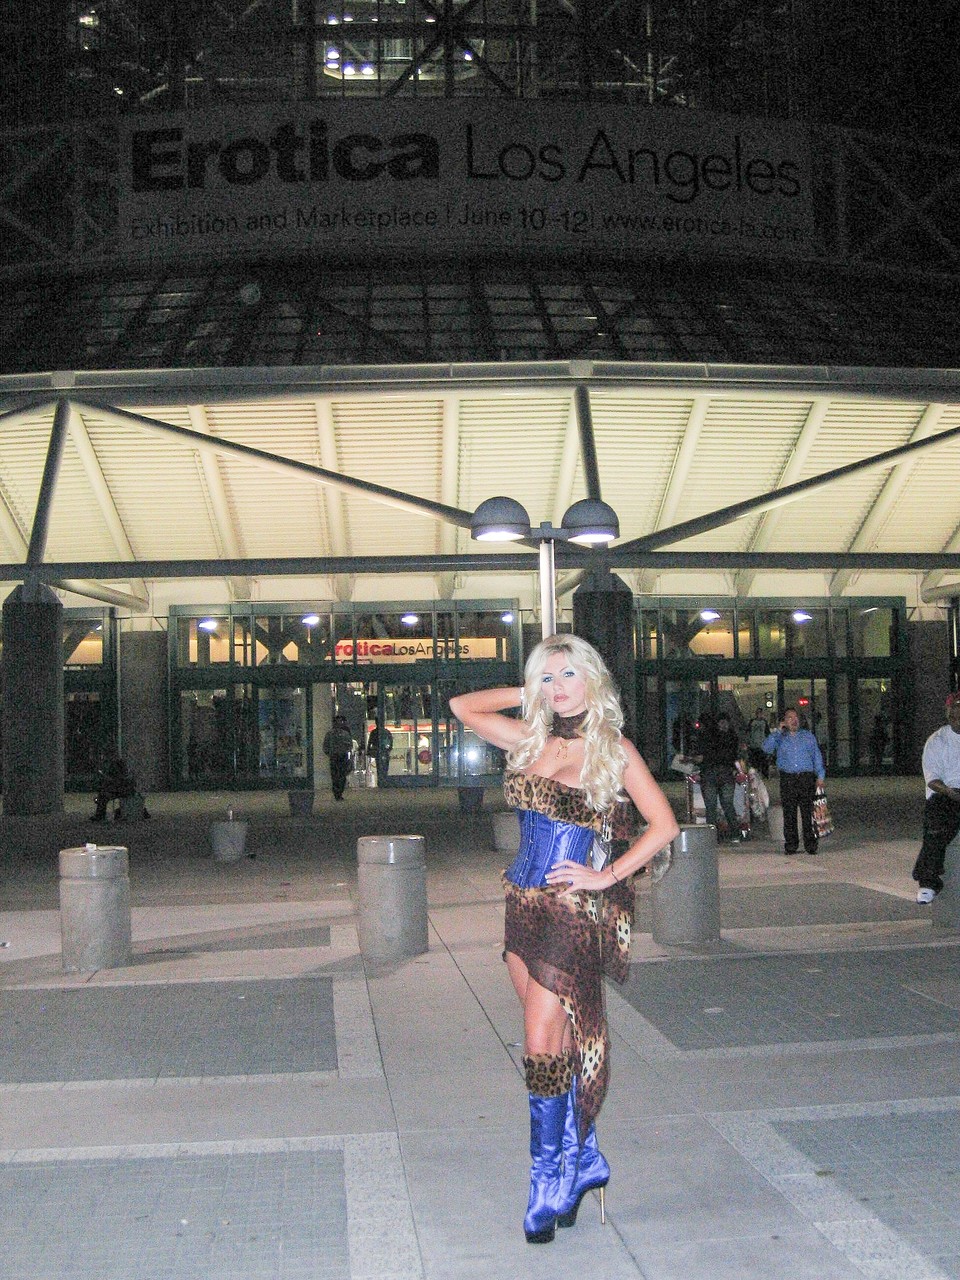 My Brittany Andrews Brittany Andrews foto porno #425347621 | My Brittany Andrews Pics, Brittany Andrews, Skirt, porno ponsel